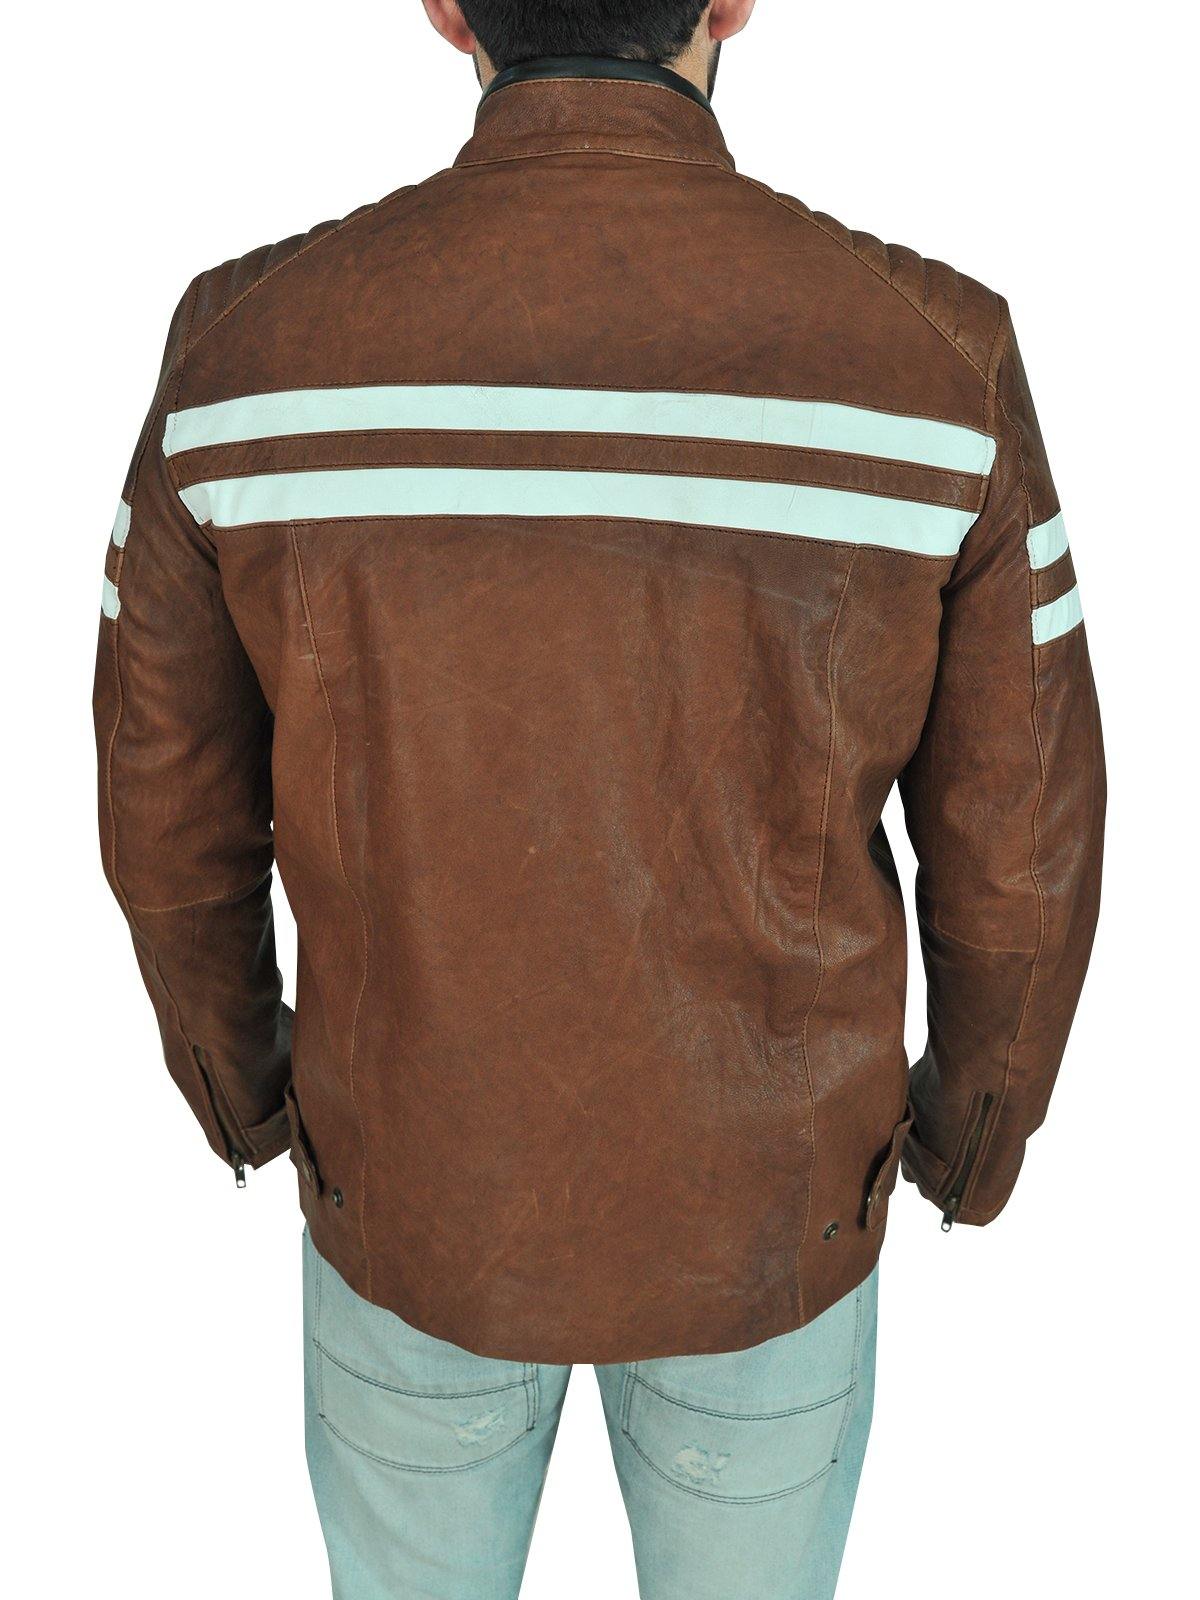 Classic Brown Leather Biker Jacket - Wiseleather